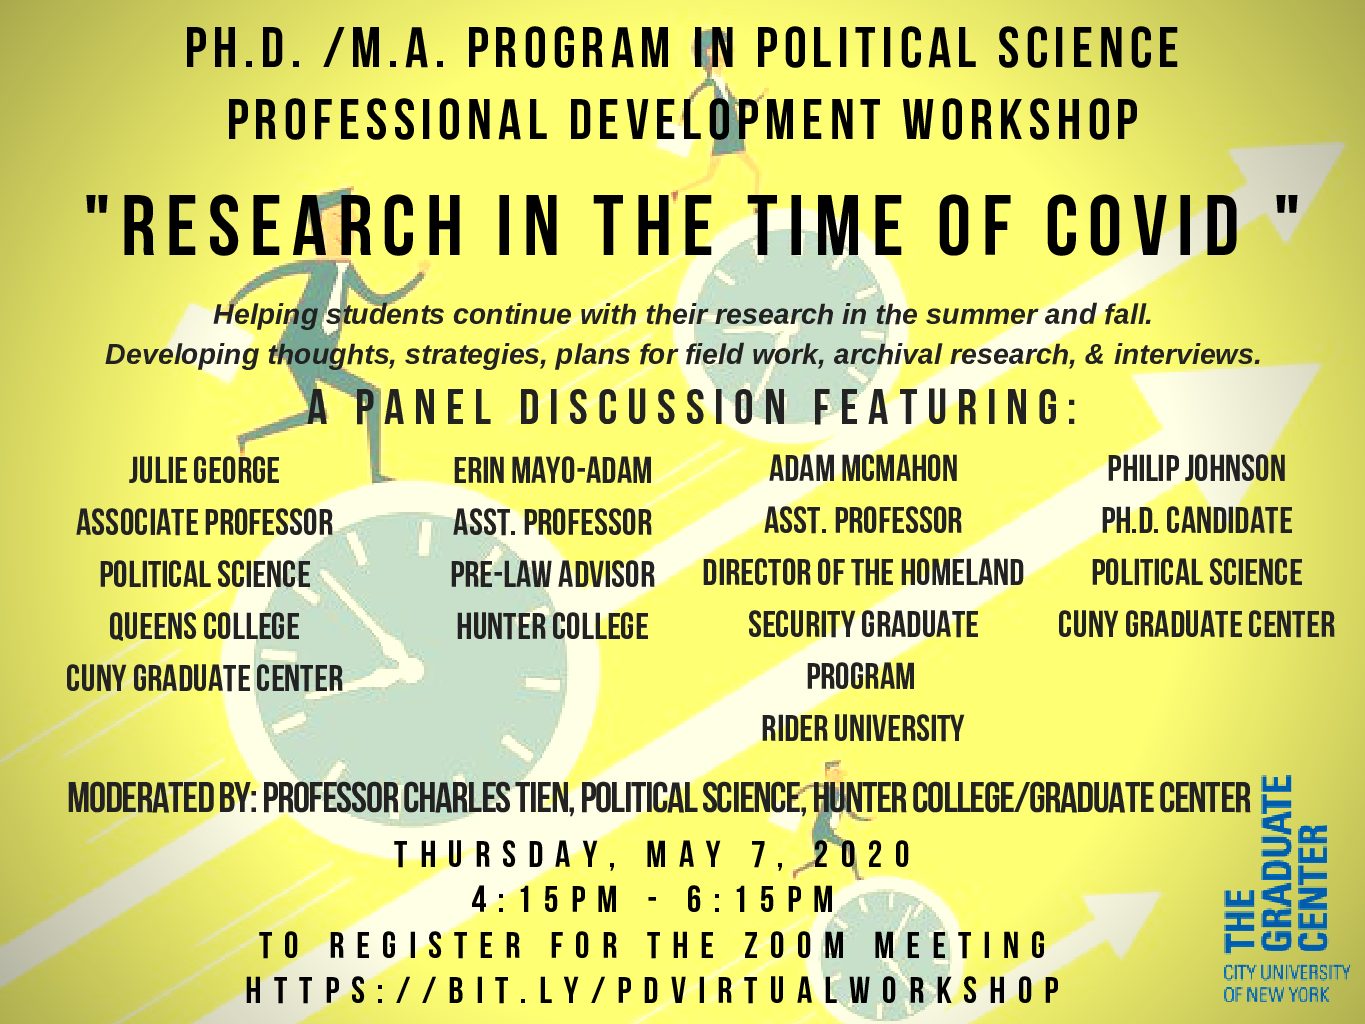 Professional Development Workshop: Research in the time of COVID